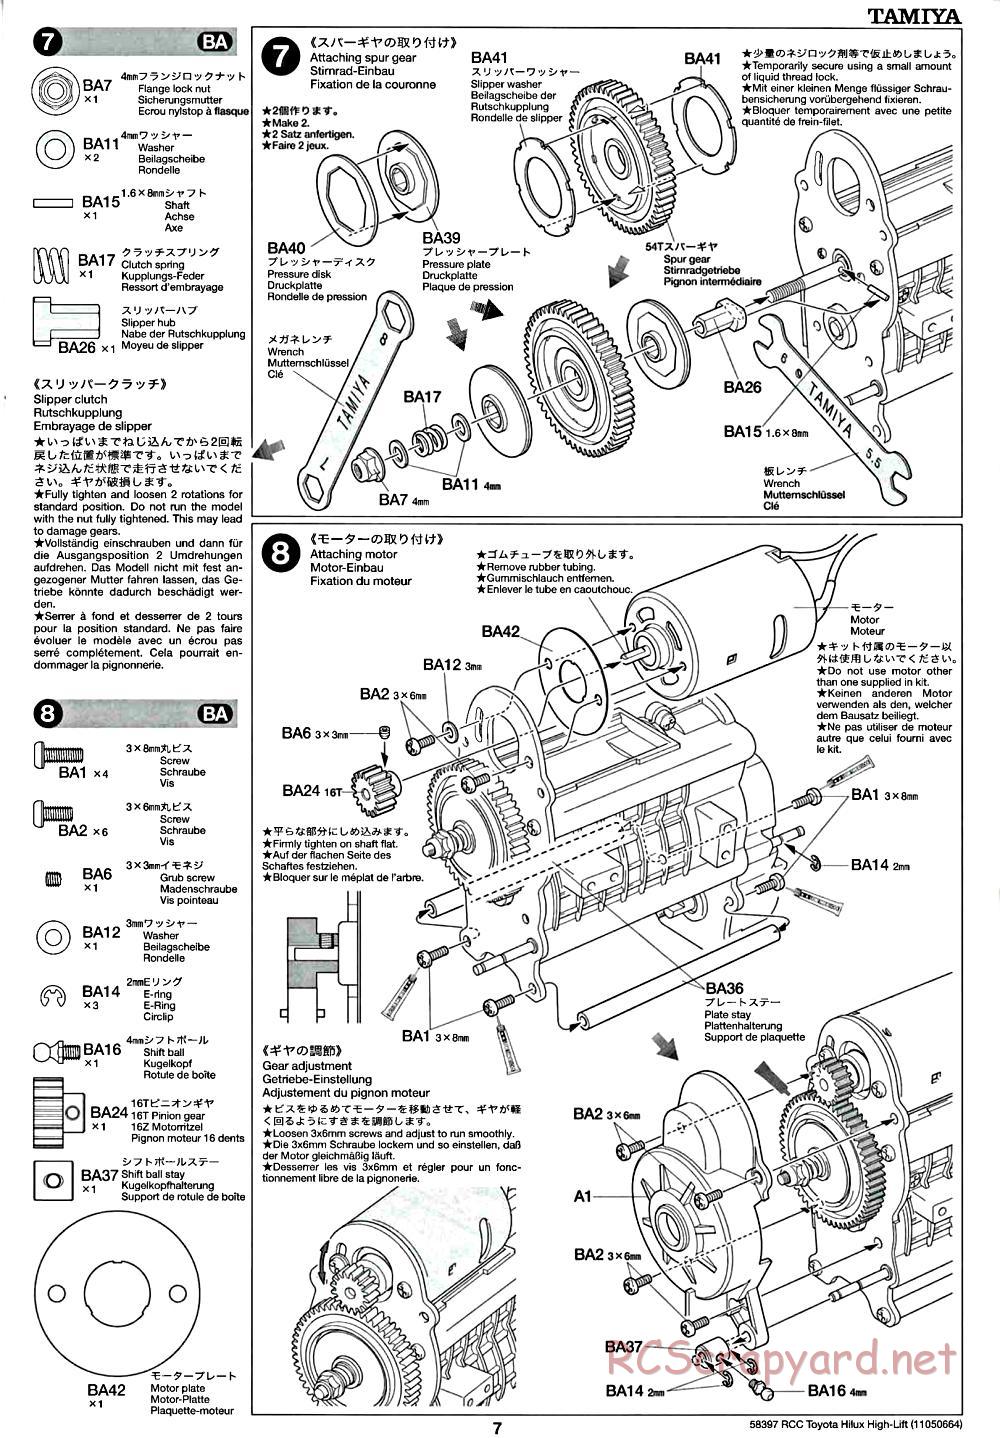 Tamiya - Toyota Hilux High-Lift Chassis - Manual - Page 7